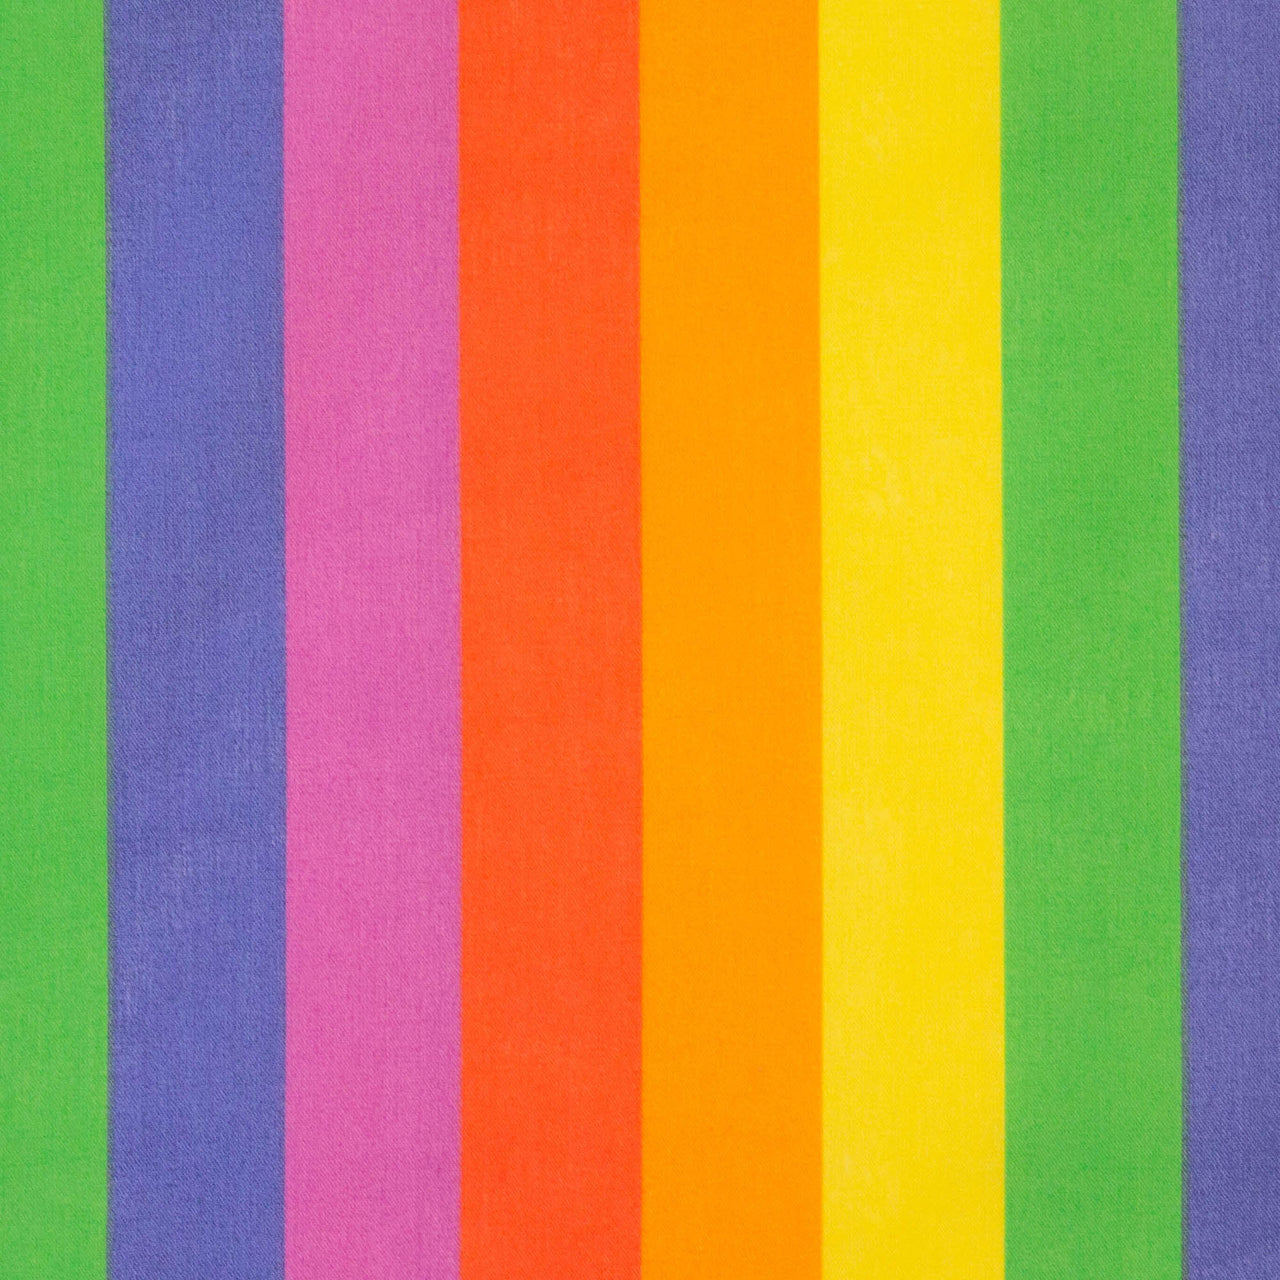 Rainbow Stripes 27 mm Wide on Printed Poly Cotton Fabric ideal for Pride & Learn